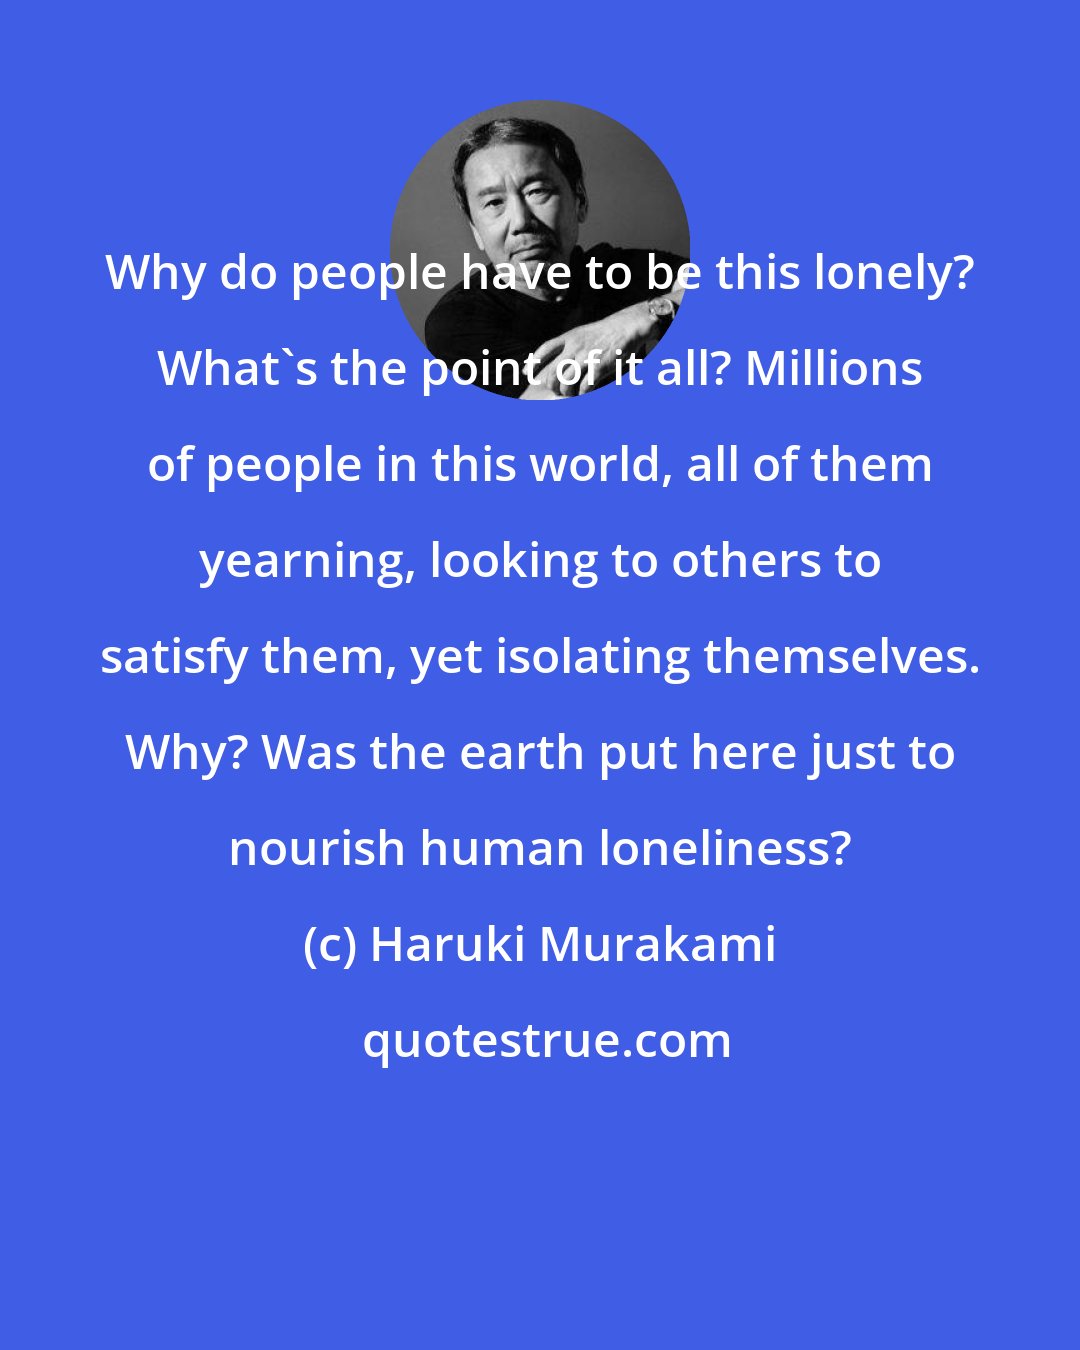 Haruki Murakami: Why do people have to be this lonely? What's the point of it all? Millions of people in this world, all of them yearning, looking to others to satisfy them, yet isolating themselves. Why? Was the earth put here just to nourish human loneliness?